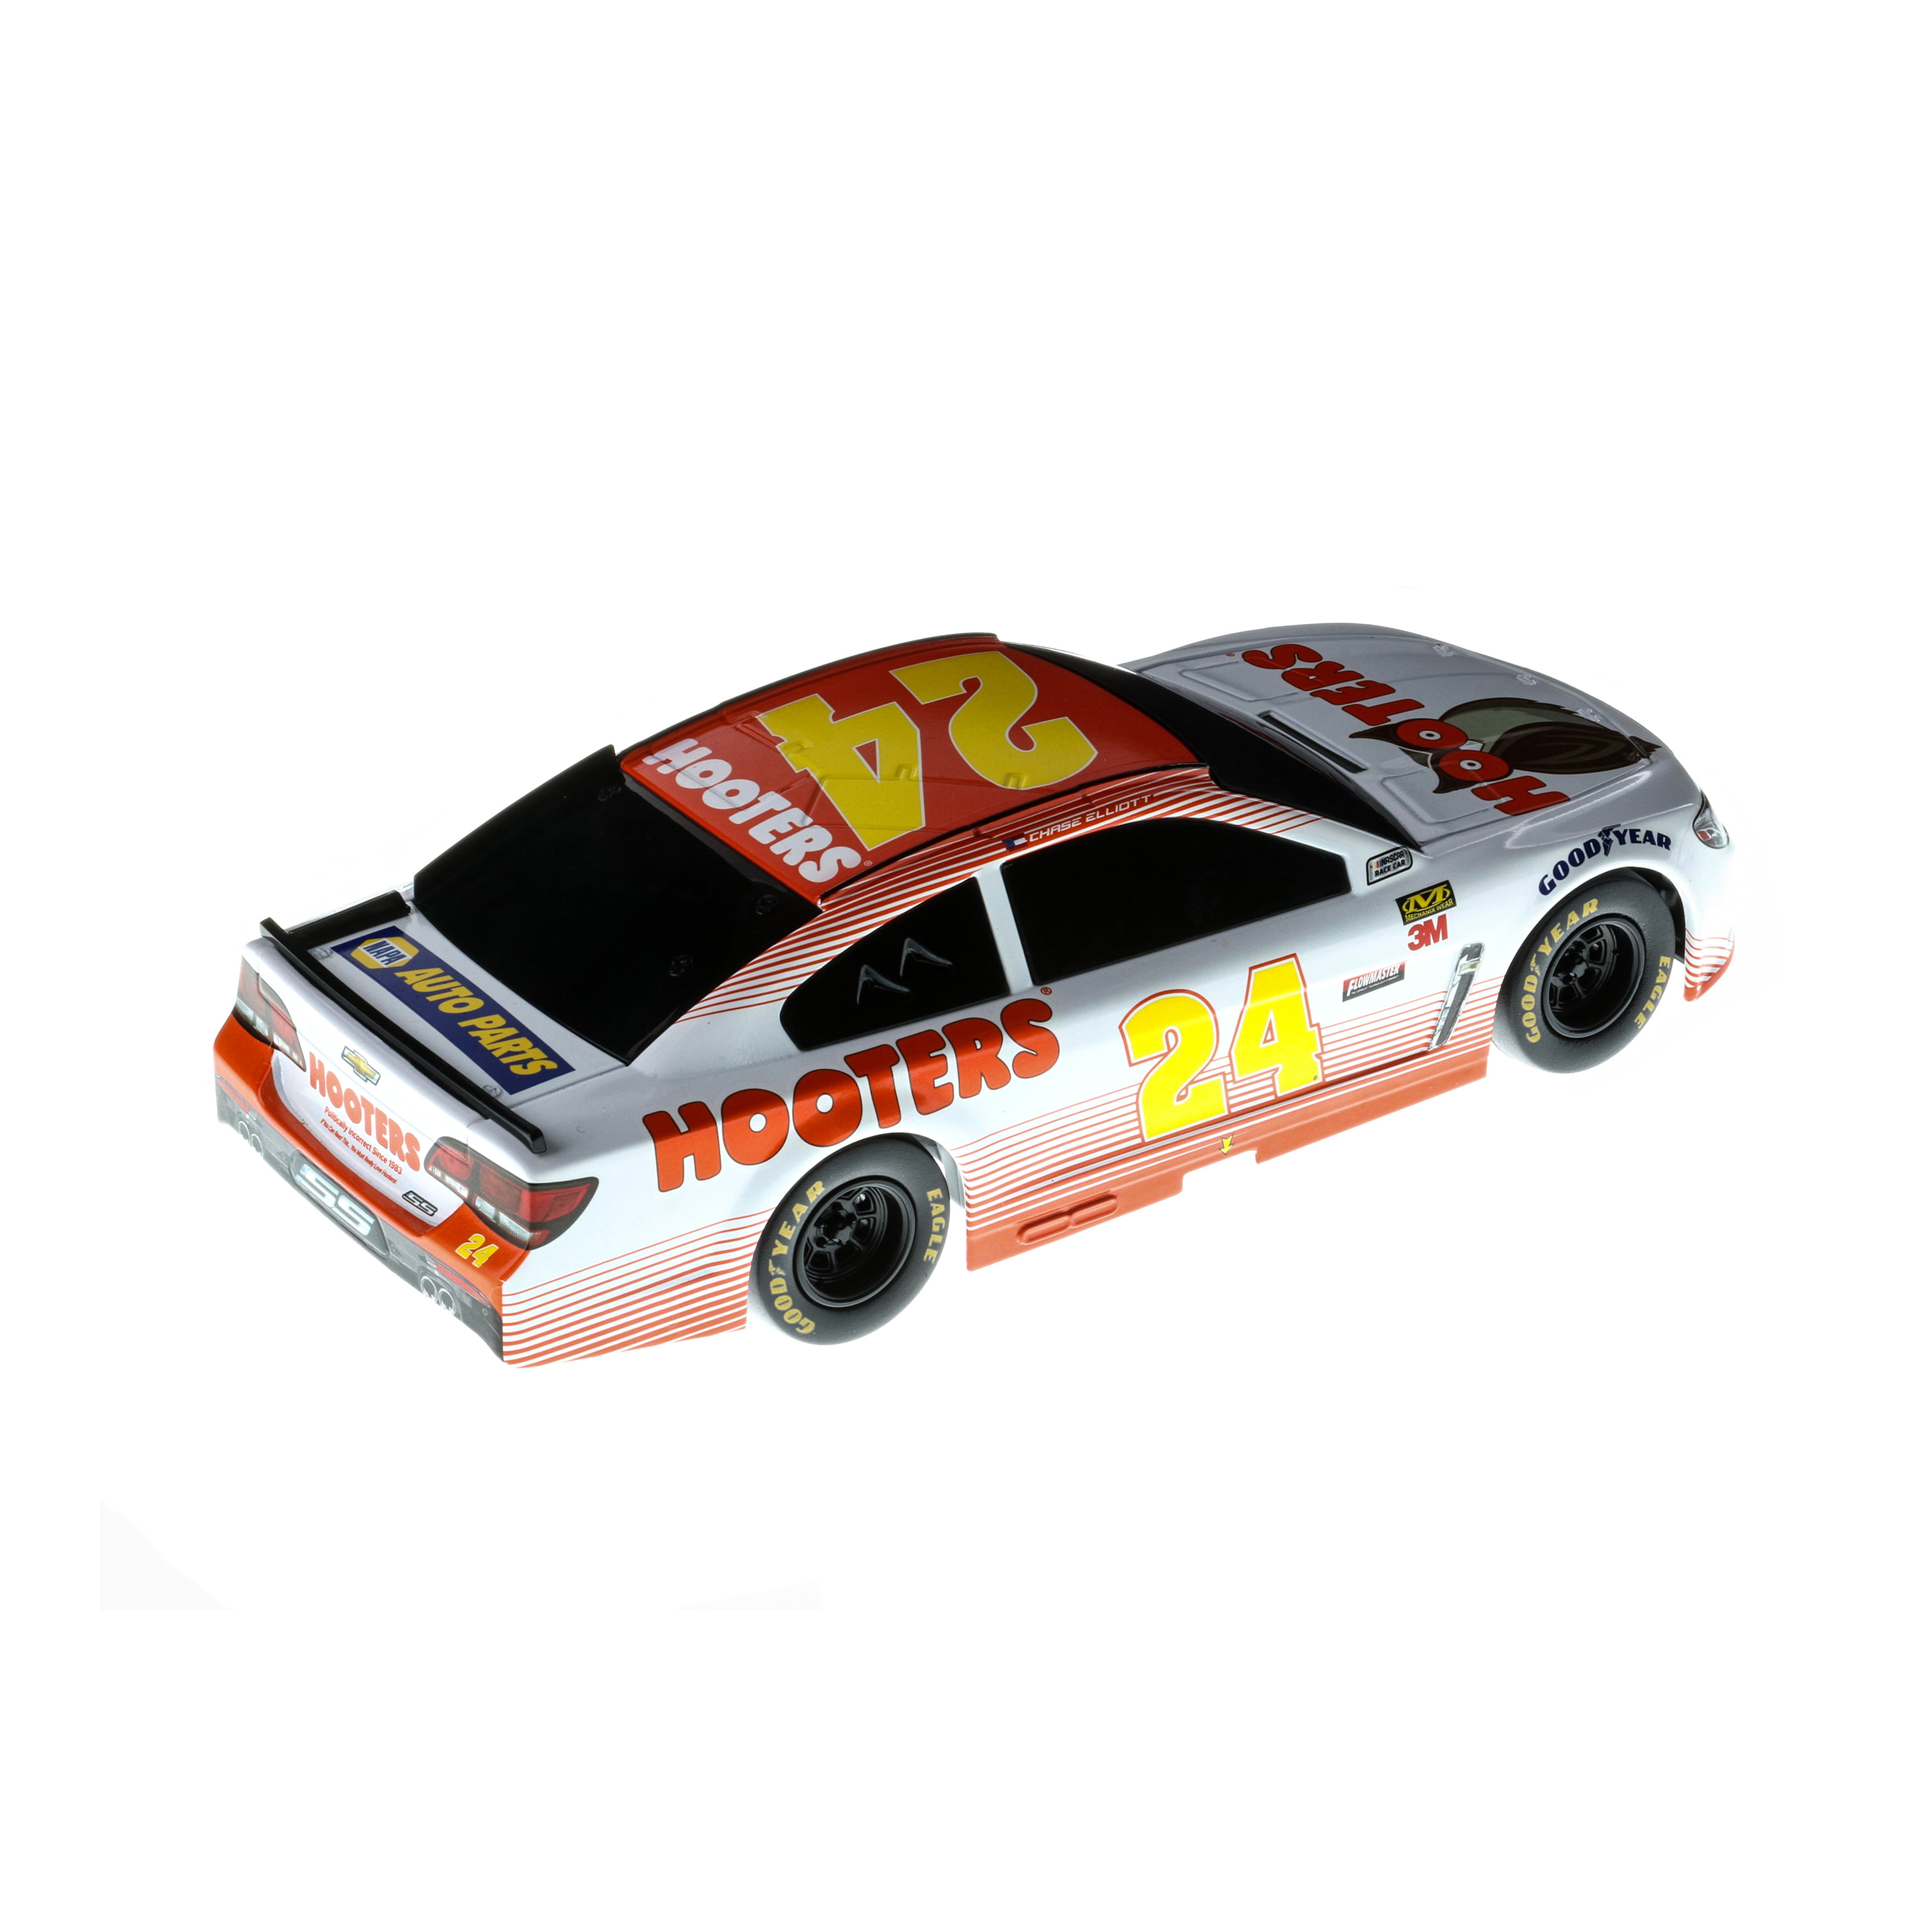 Chase Elliott #24 Hooters 2017 Action 1:64 Scale Diecast NASCAR 